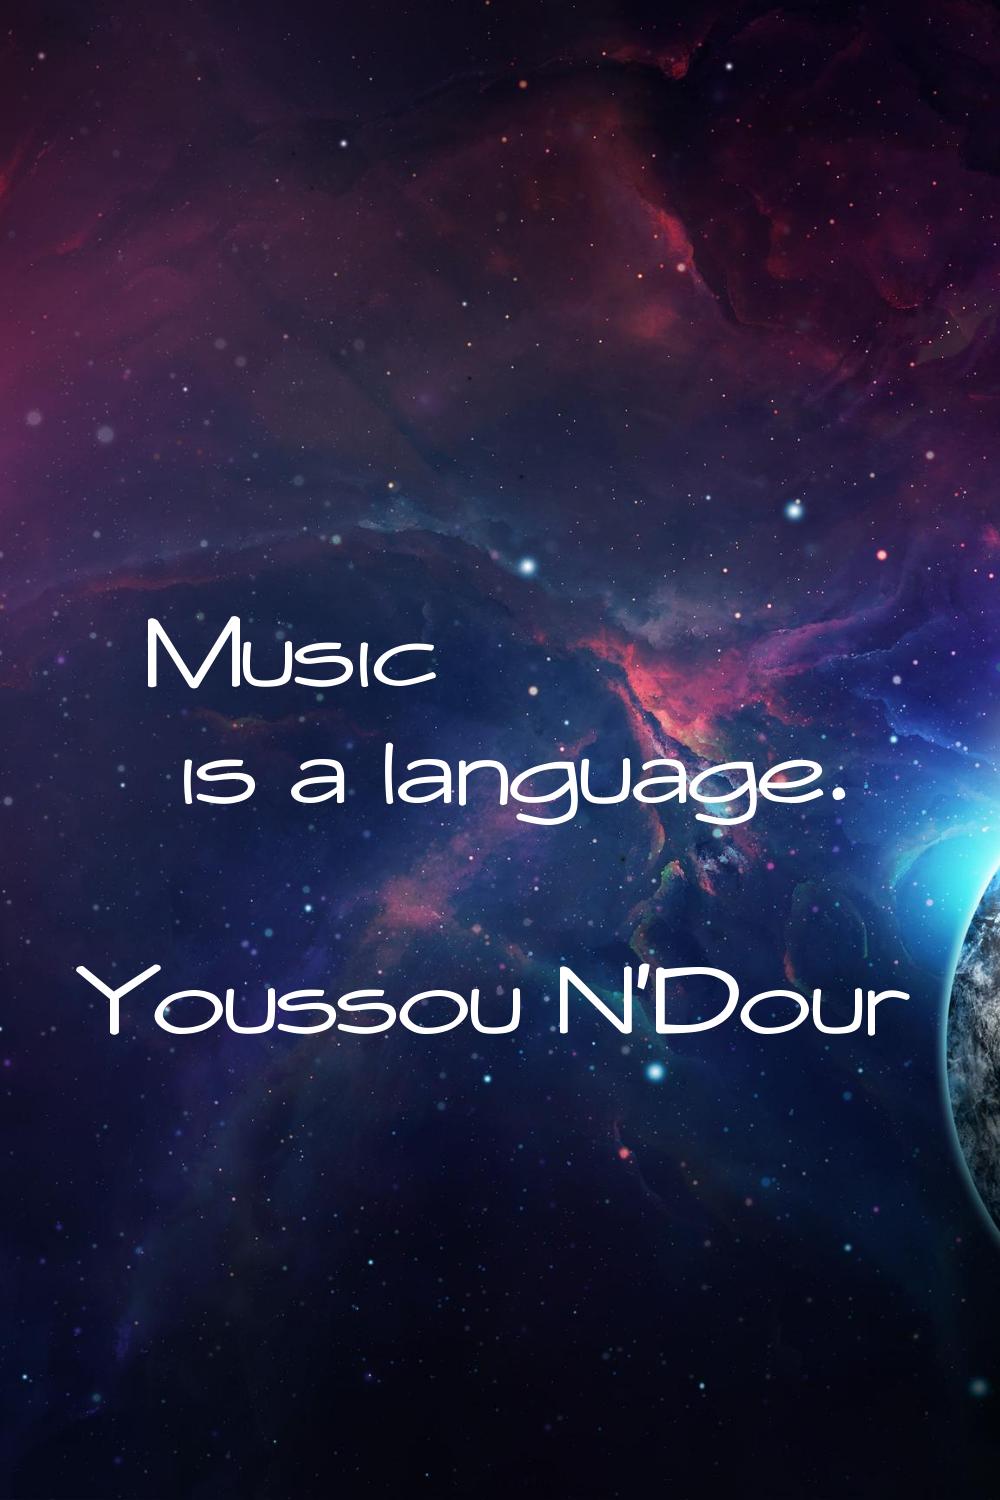 Music is a language.